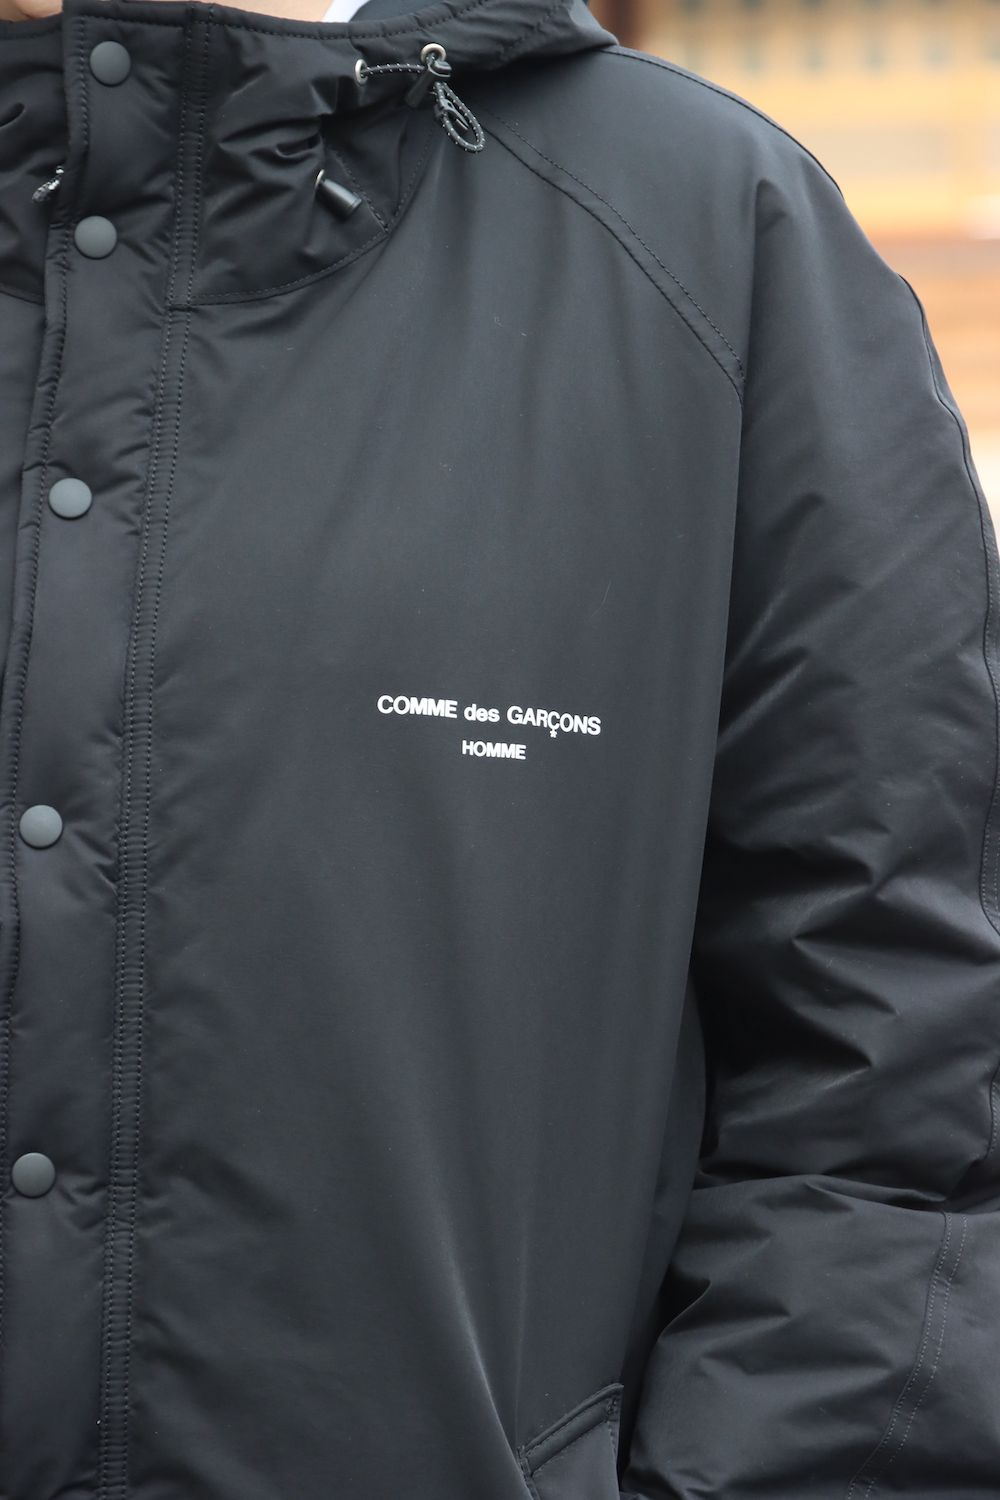 COMME des GARCONS HOMME 22AW ダウン | ochge.org